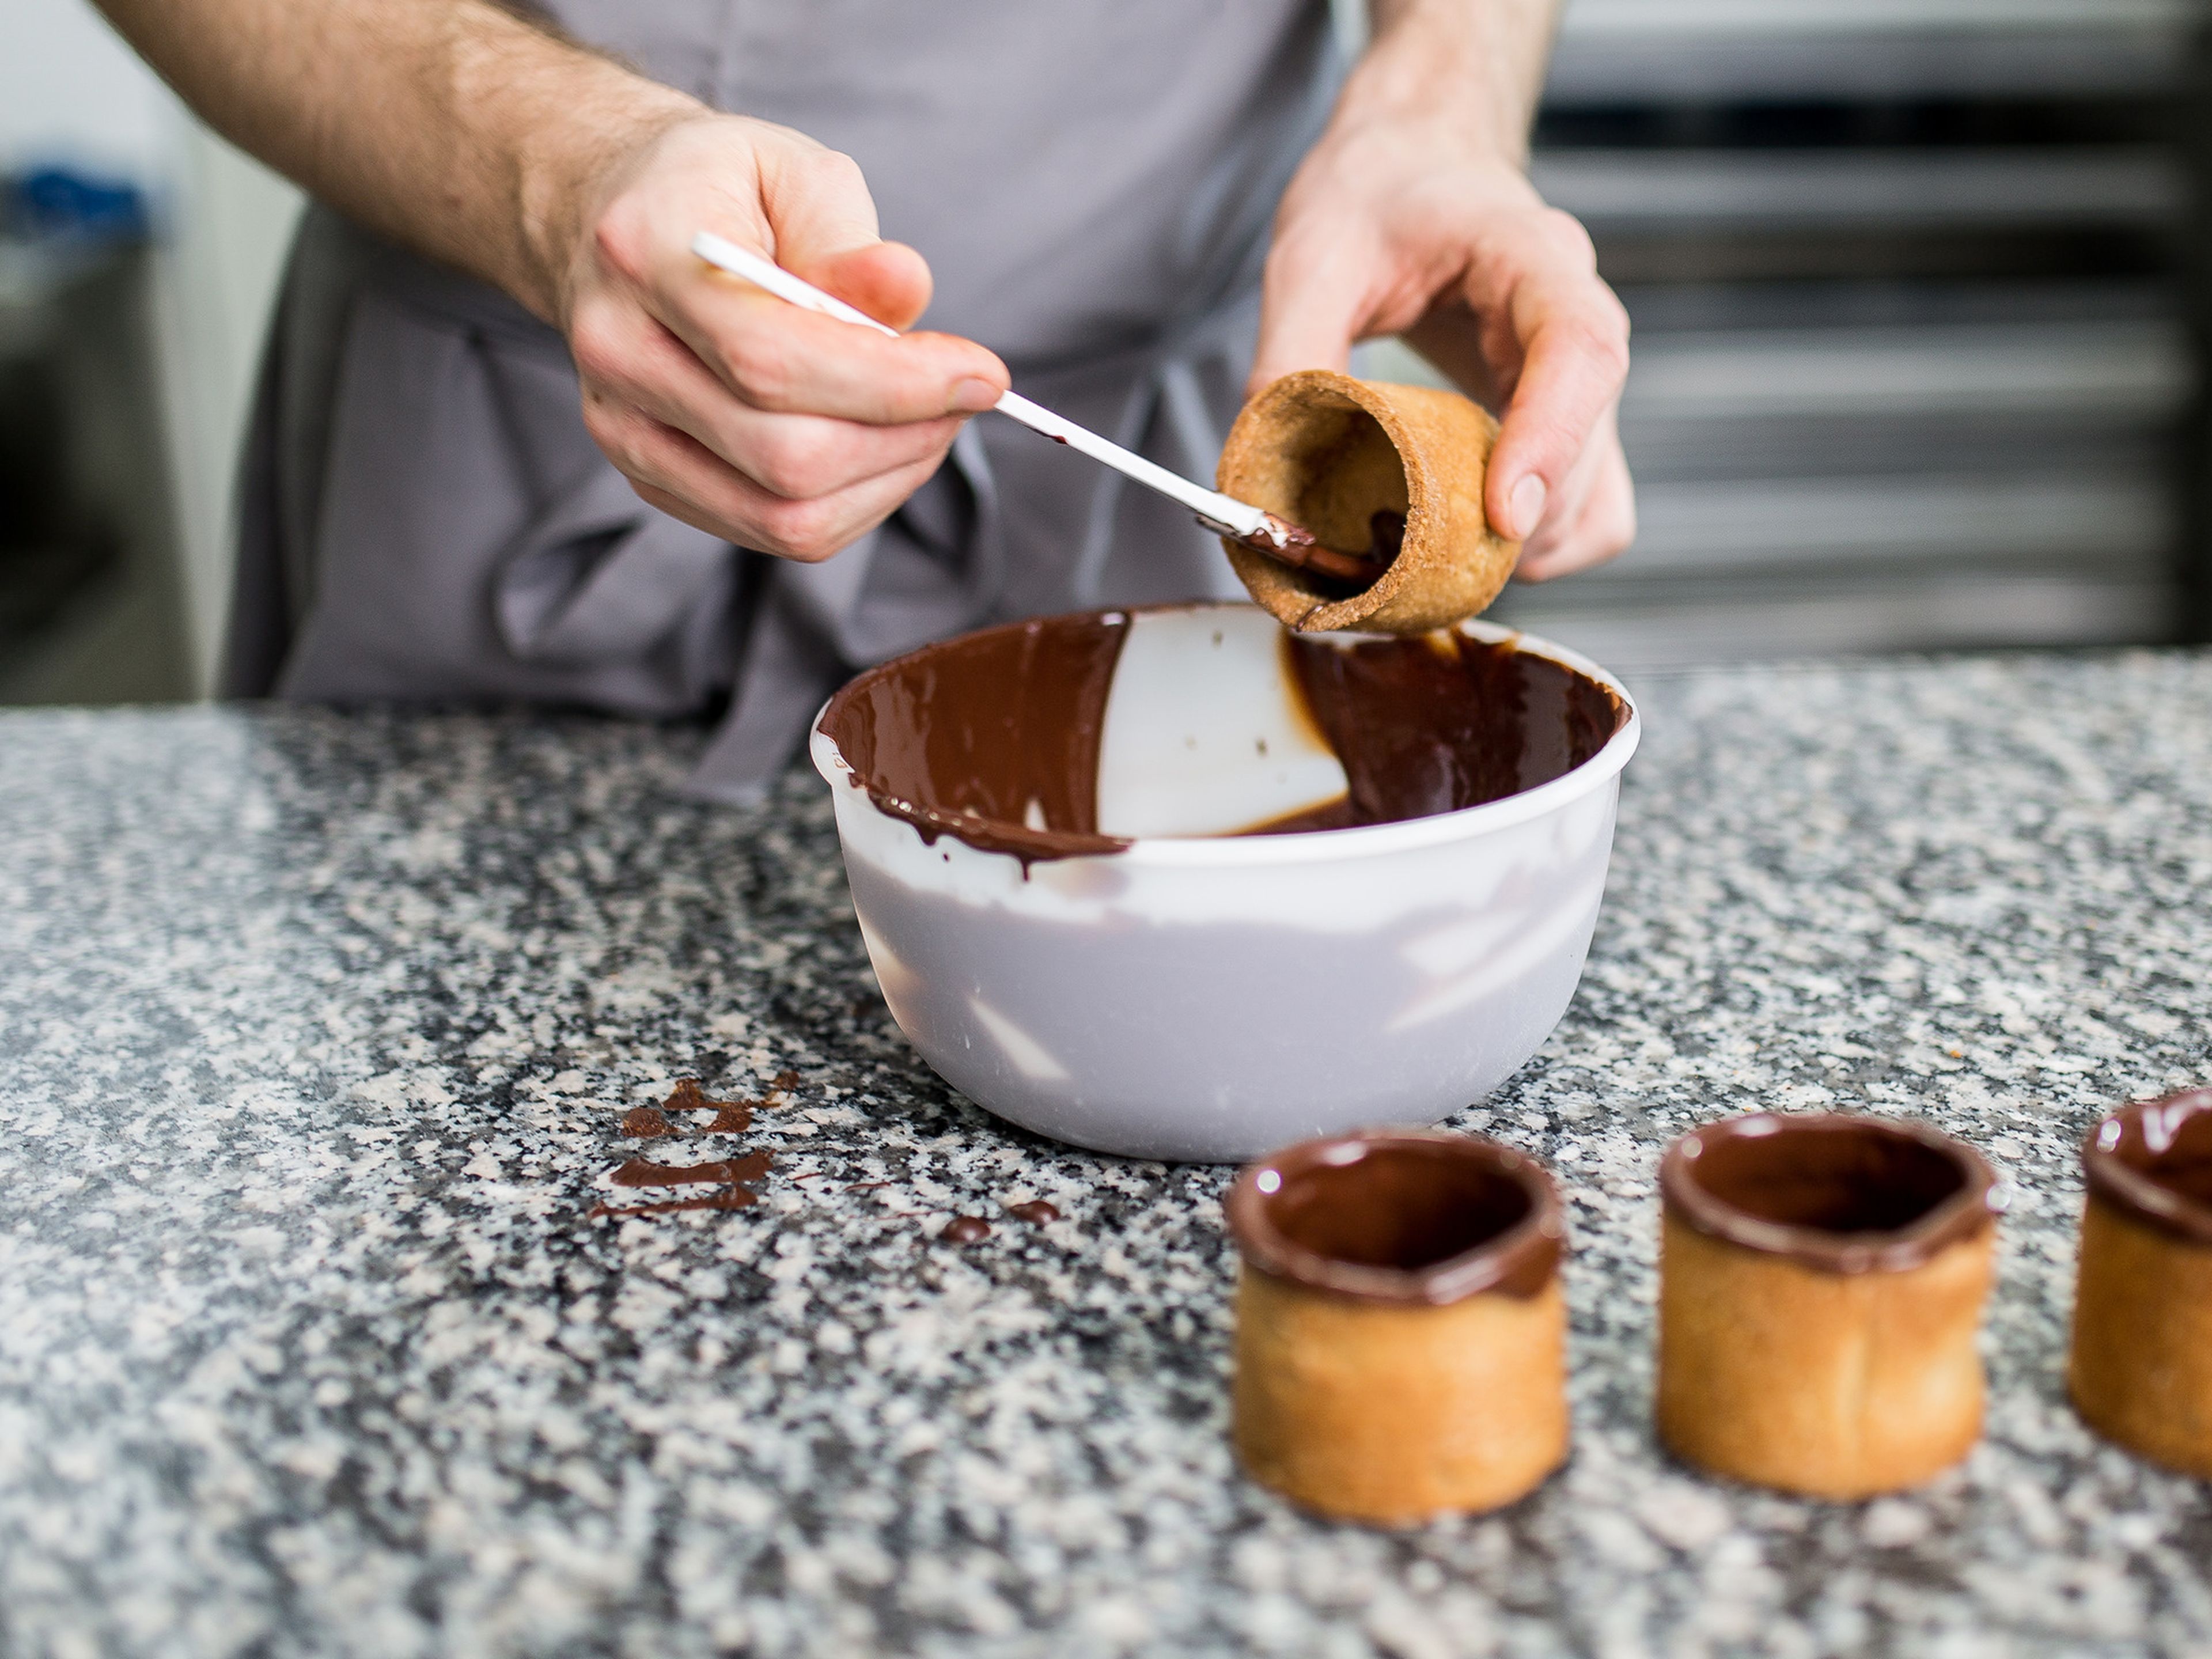 Once the mixture has reached 32°C/90°F, start to glaze the cookie cups with a pastry brush. To make sure the inside of the cups are leak-proof, apply two layers of the chocolate to the insides of the cup. To form the rim, dip the cup into the chocolate and let the excess drip off. If you like, garnish the cups with chocolate sprinkles, chopped almonds, or once the chocolate has dried, with edible gold dust. Transfer cookie cups to refrigerator to chill for approx. 20 min.